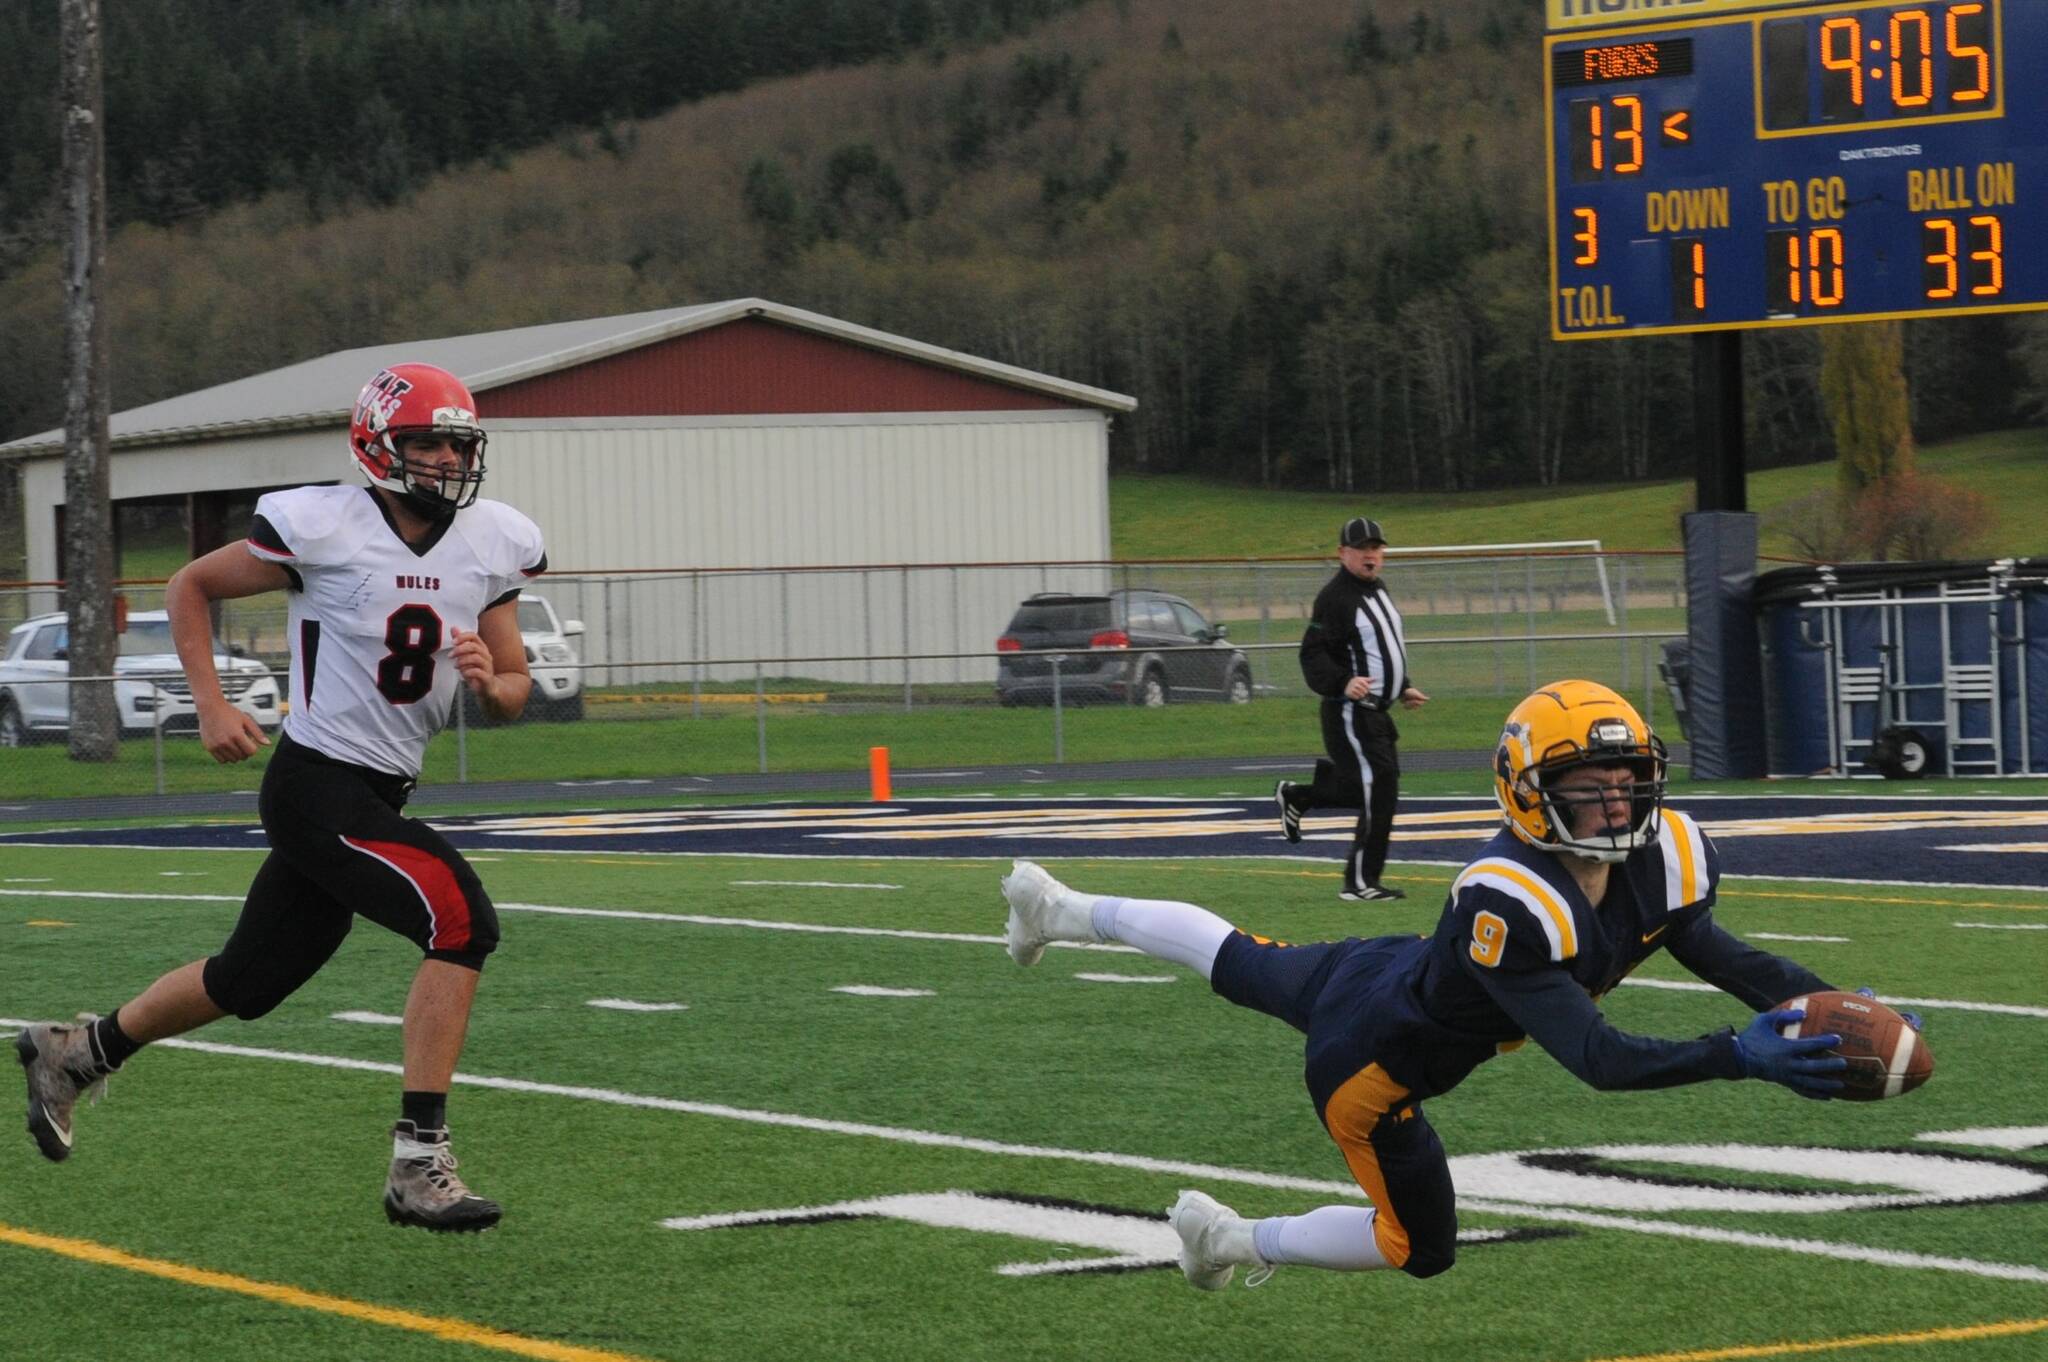 Spartan Dalton Kilmer will share his football talents with the Westside team in Yakima in June. Here Dalton dives and makes this catch against Wakiakum at Spartan Stadium. Photo by Lonnie Archibald